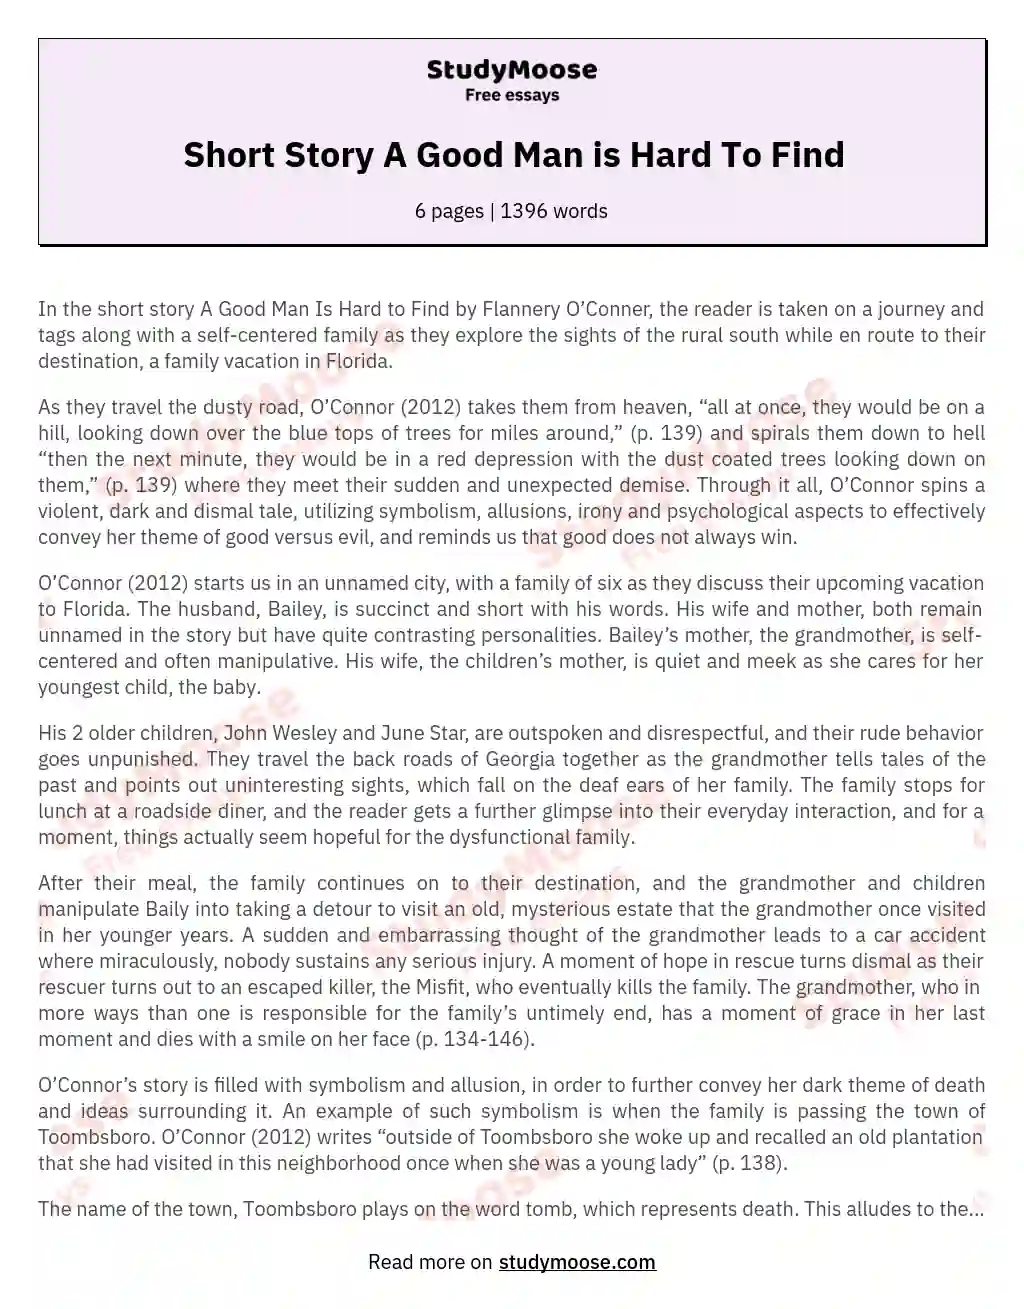 Short Story A Good Man is Hard To Find